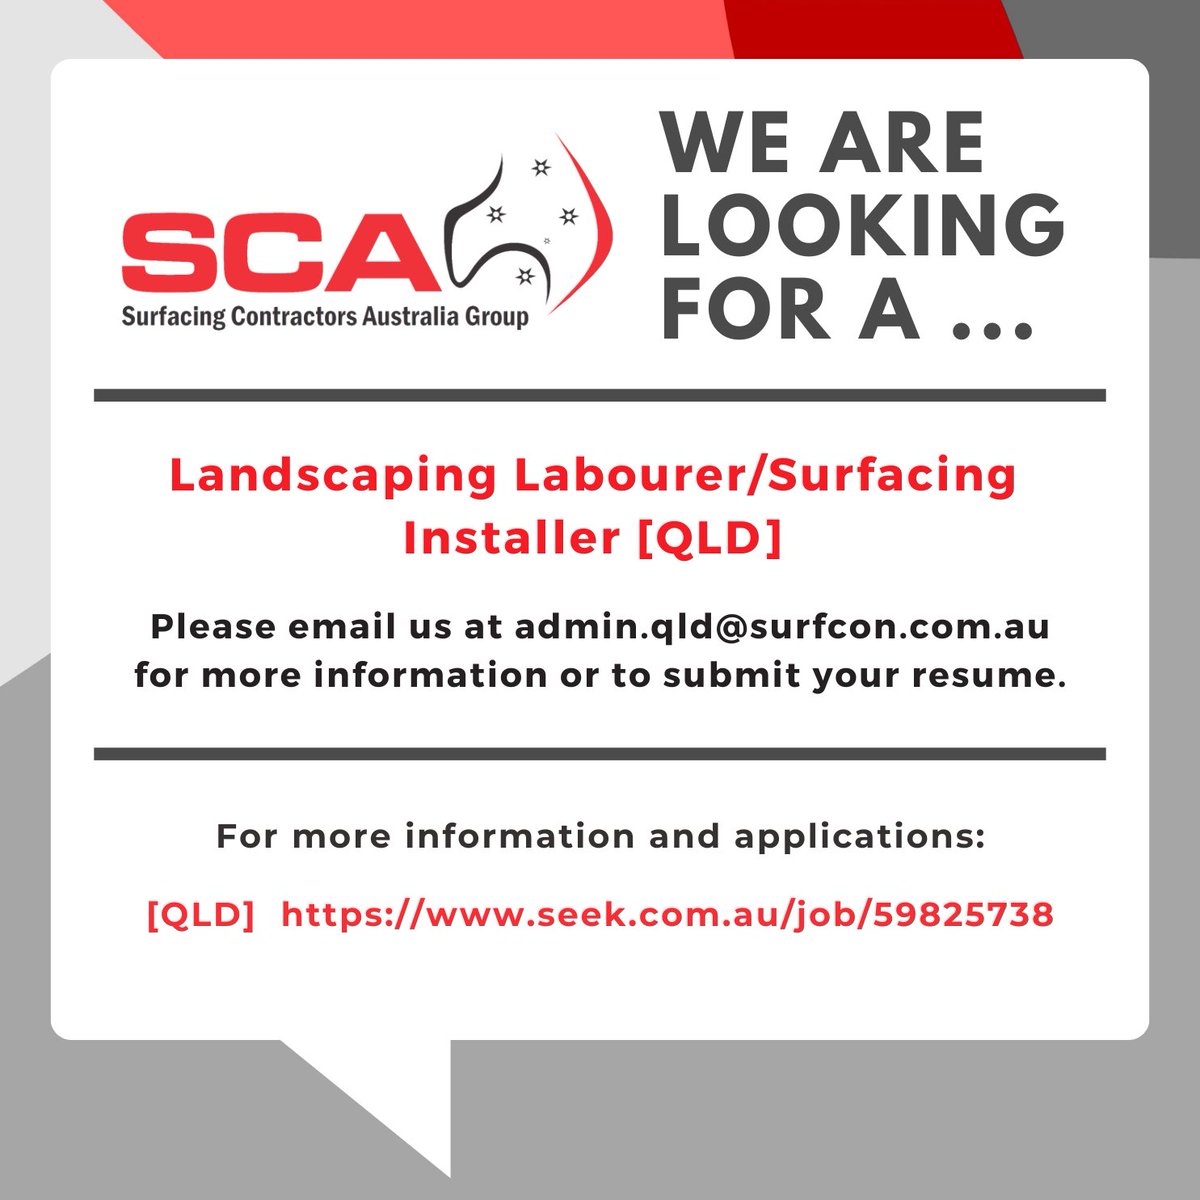 Our QLD team is looking for Landscape Labourers/Surfacing Installers.
Follow the below link for more info:
seek.com.au/job/59825738
If you would like to submit your resume, contact us via the below email:
admin.qld@surfcon.com.au
 #brisbane #jobsinbrisbane #brisbanejobs